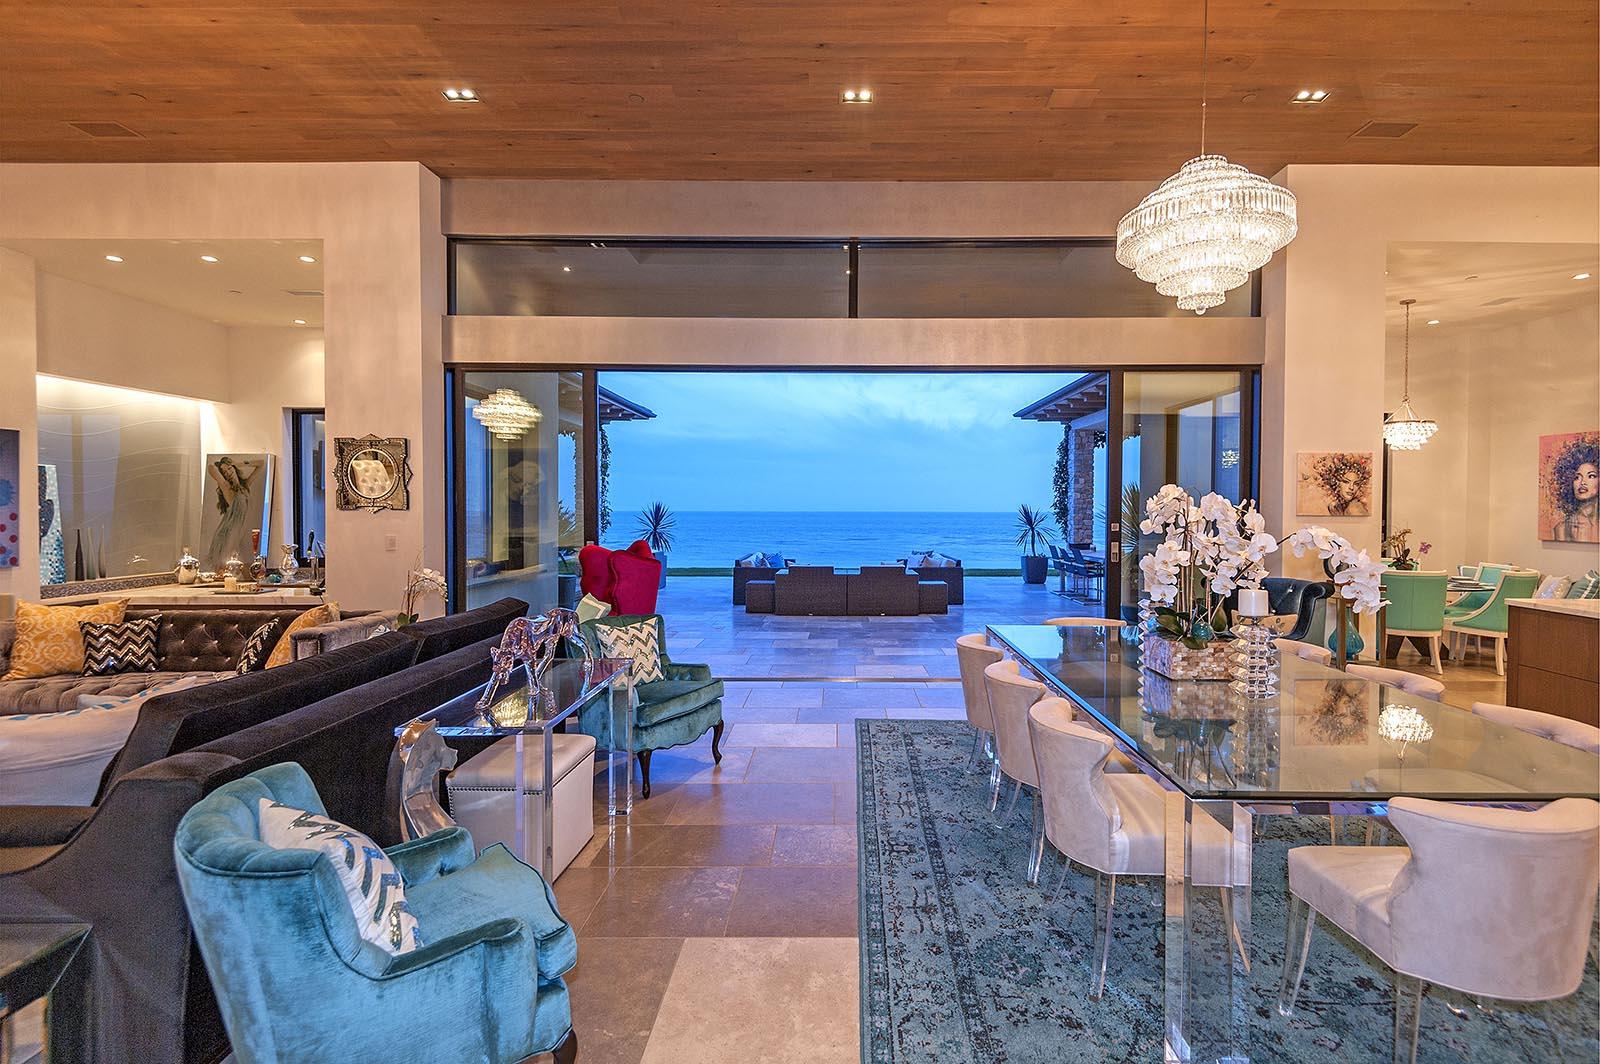 Luxurious! See Britney Spears' enjoying with her family in $30 million Airbnb villa at Malibu 